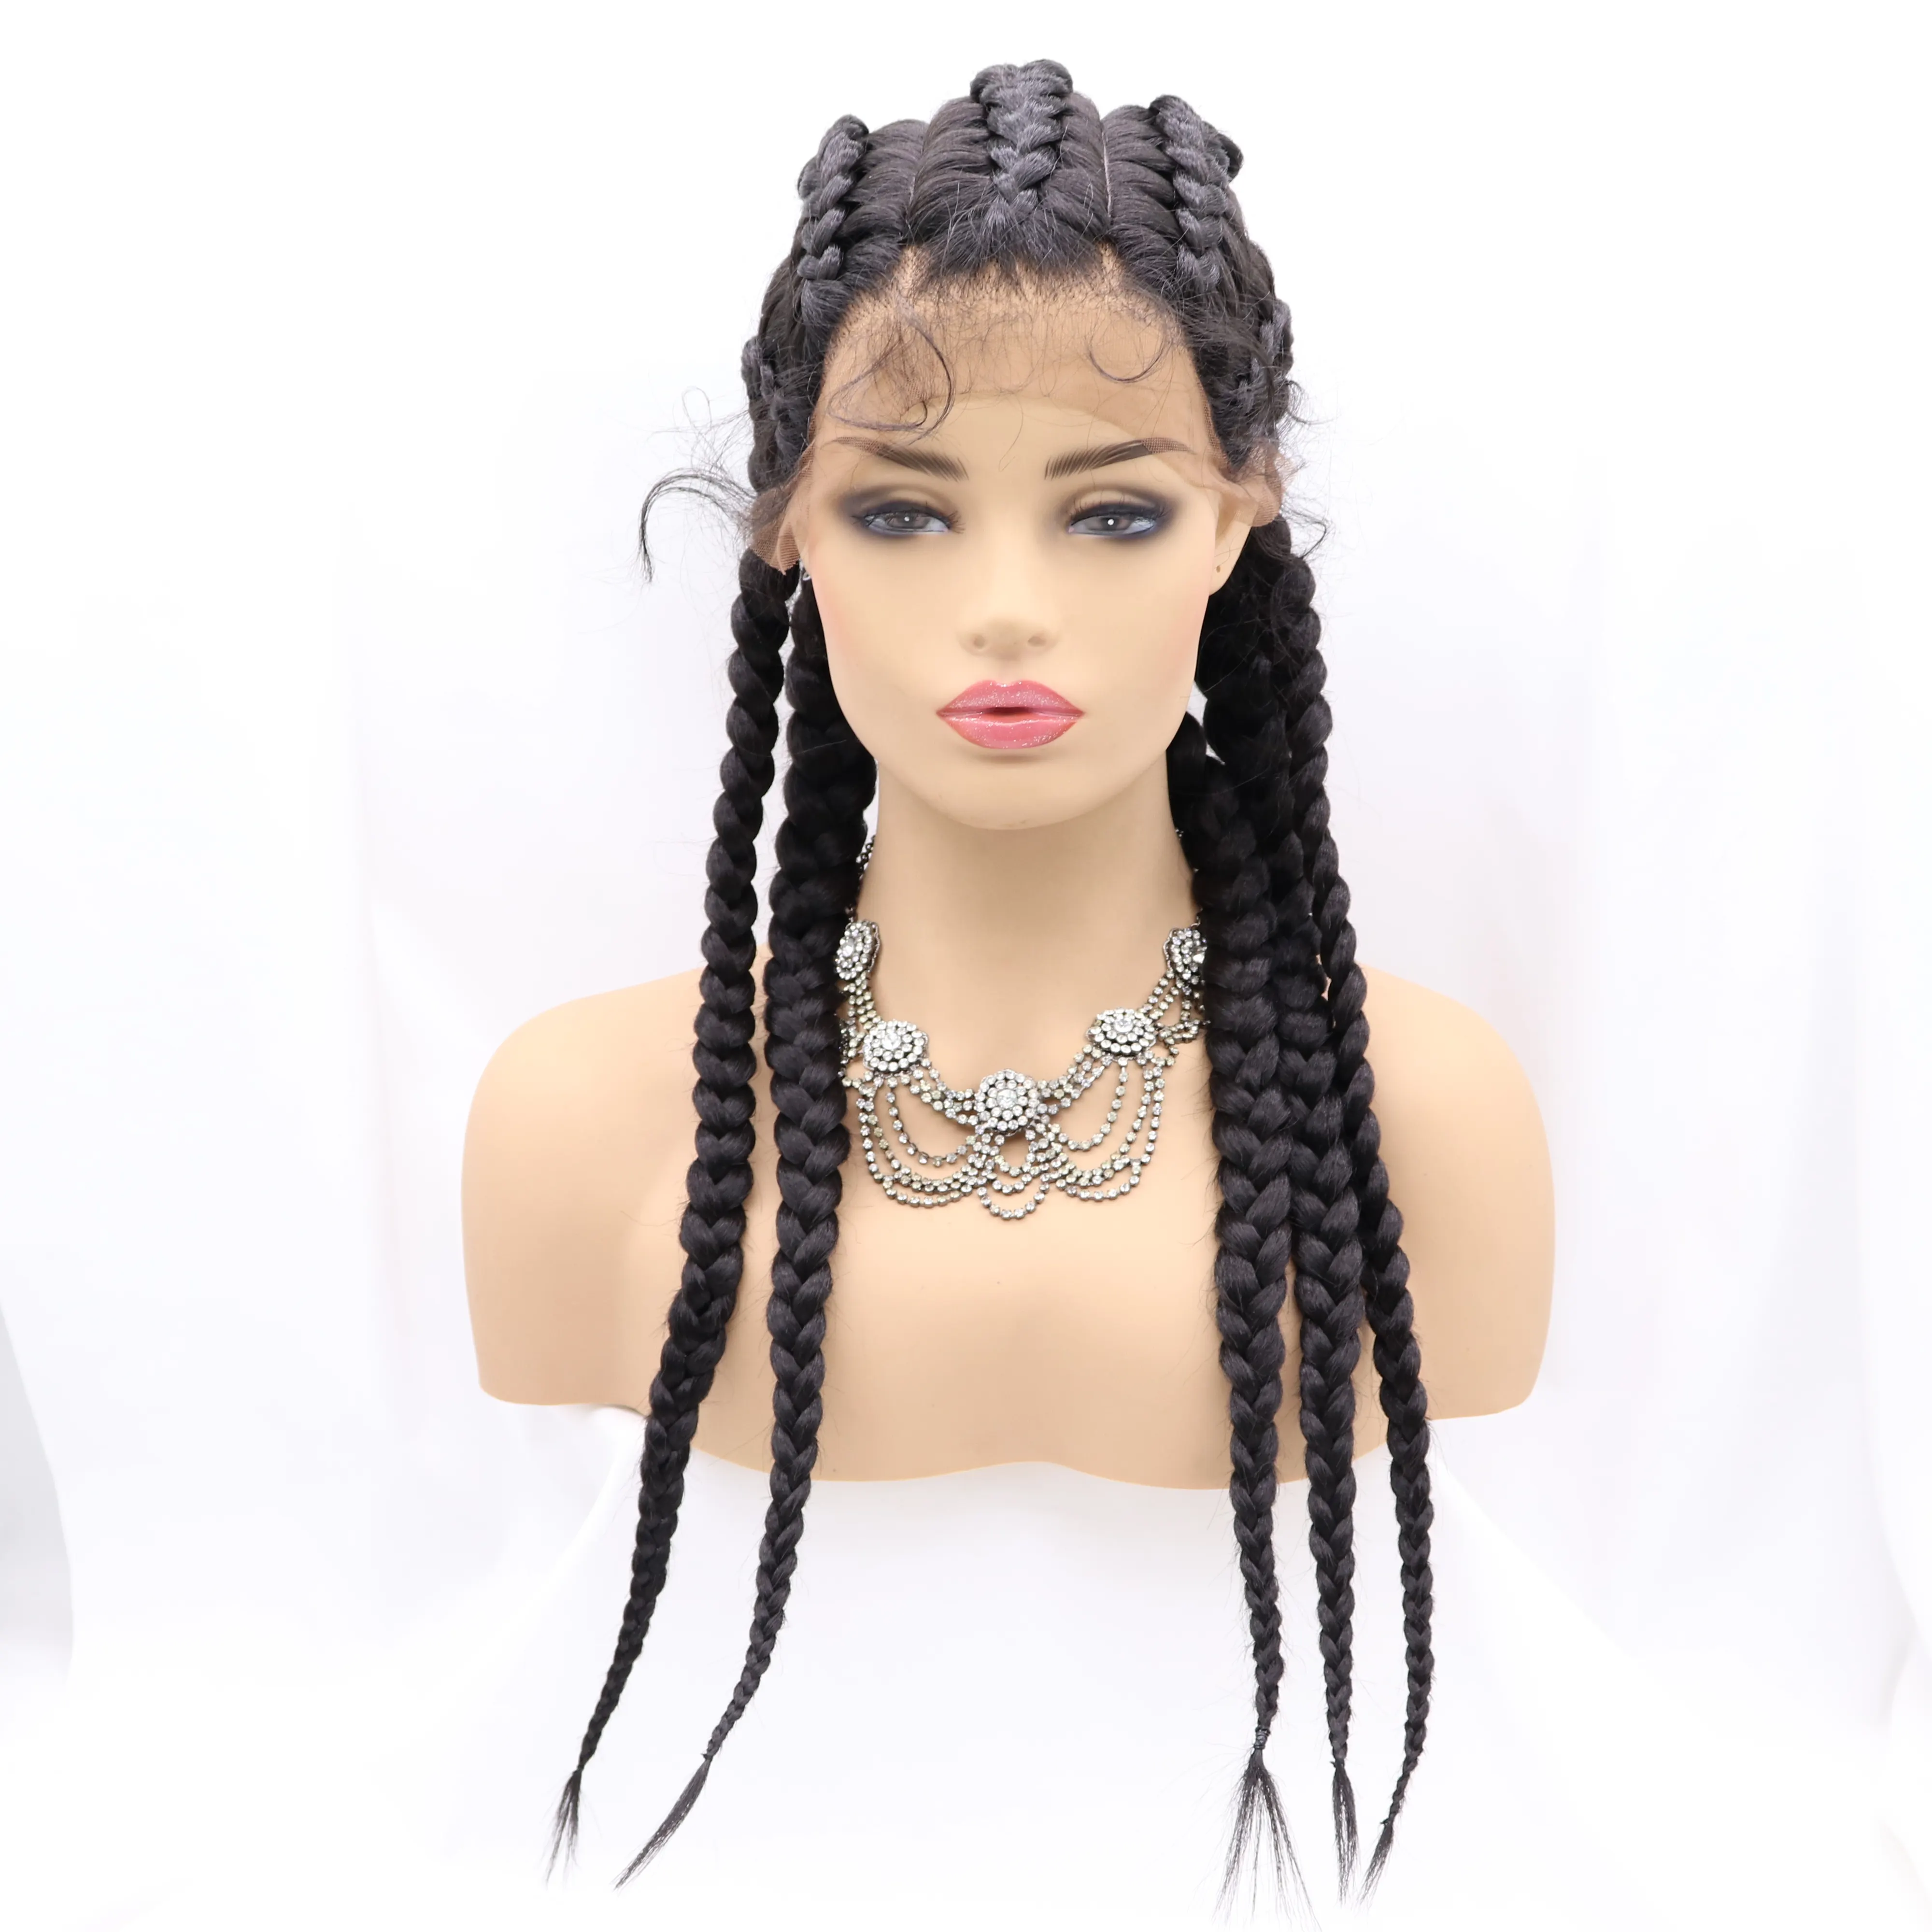 Wholesale transparent lace braided wigs with bangs hair braided wig for black women front lace blonde lace frontal braided wigs